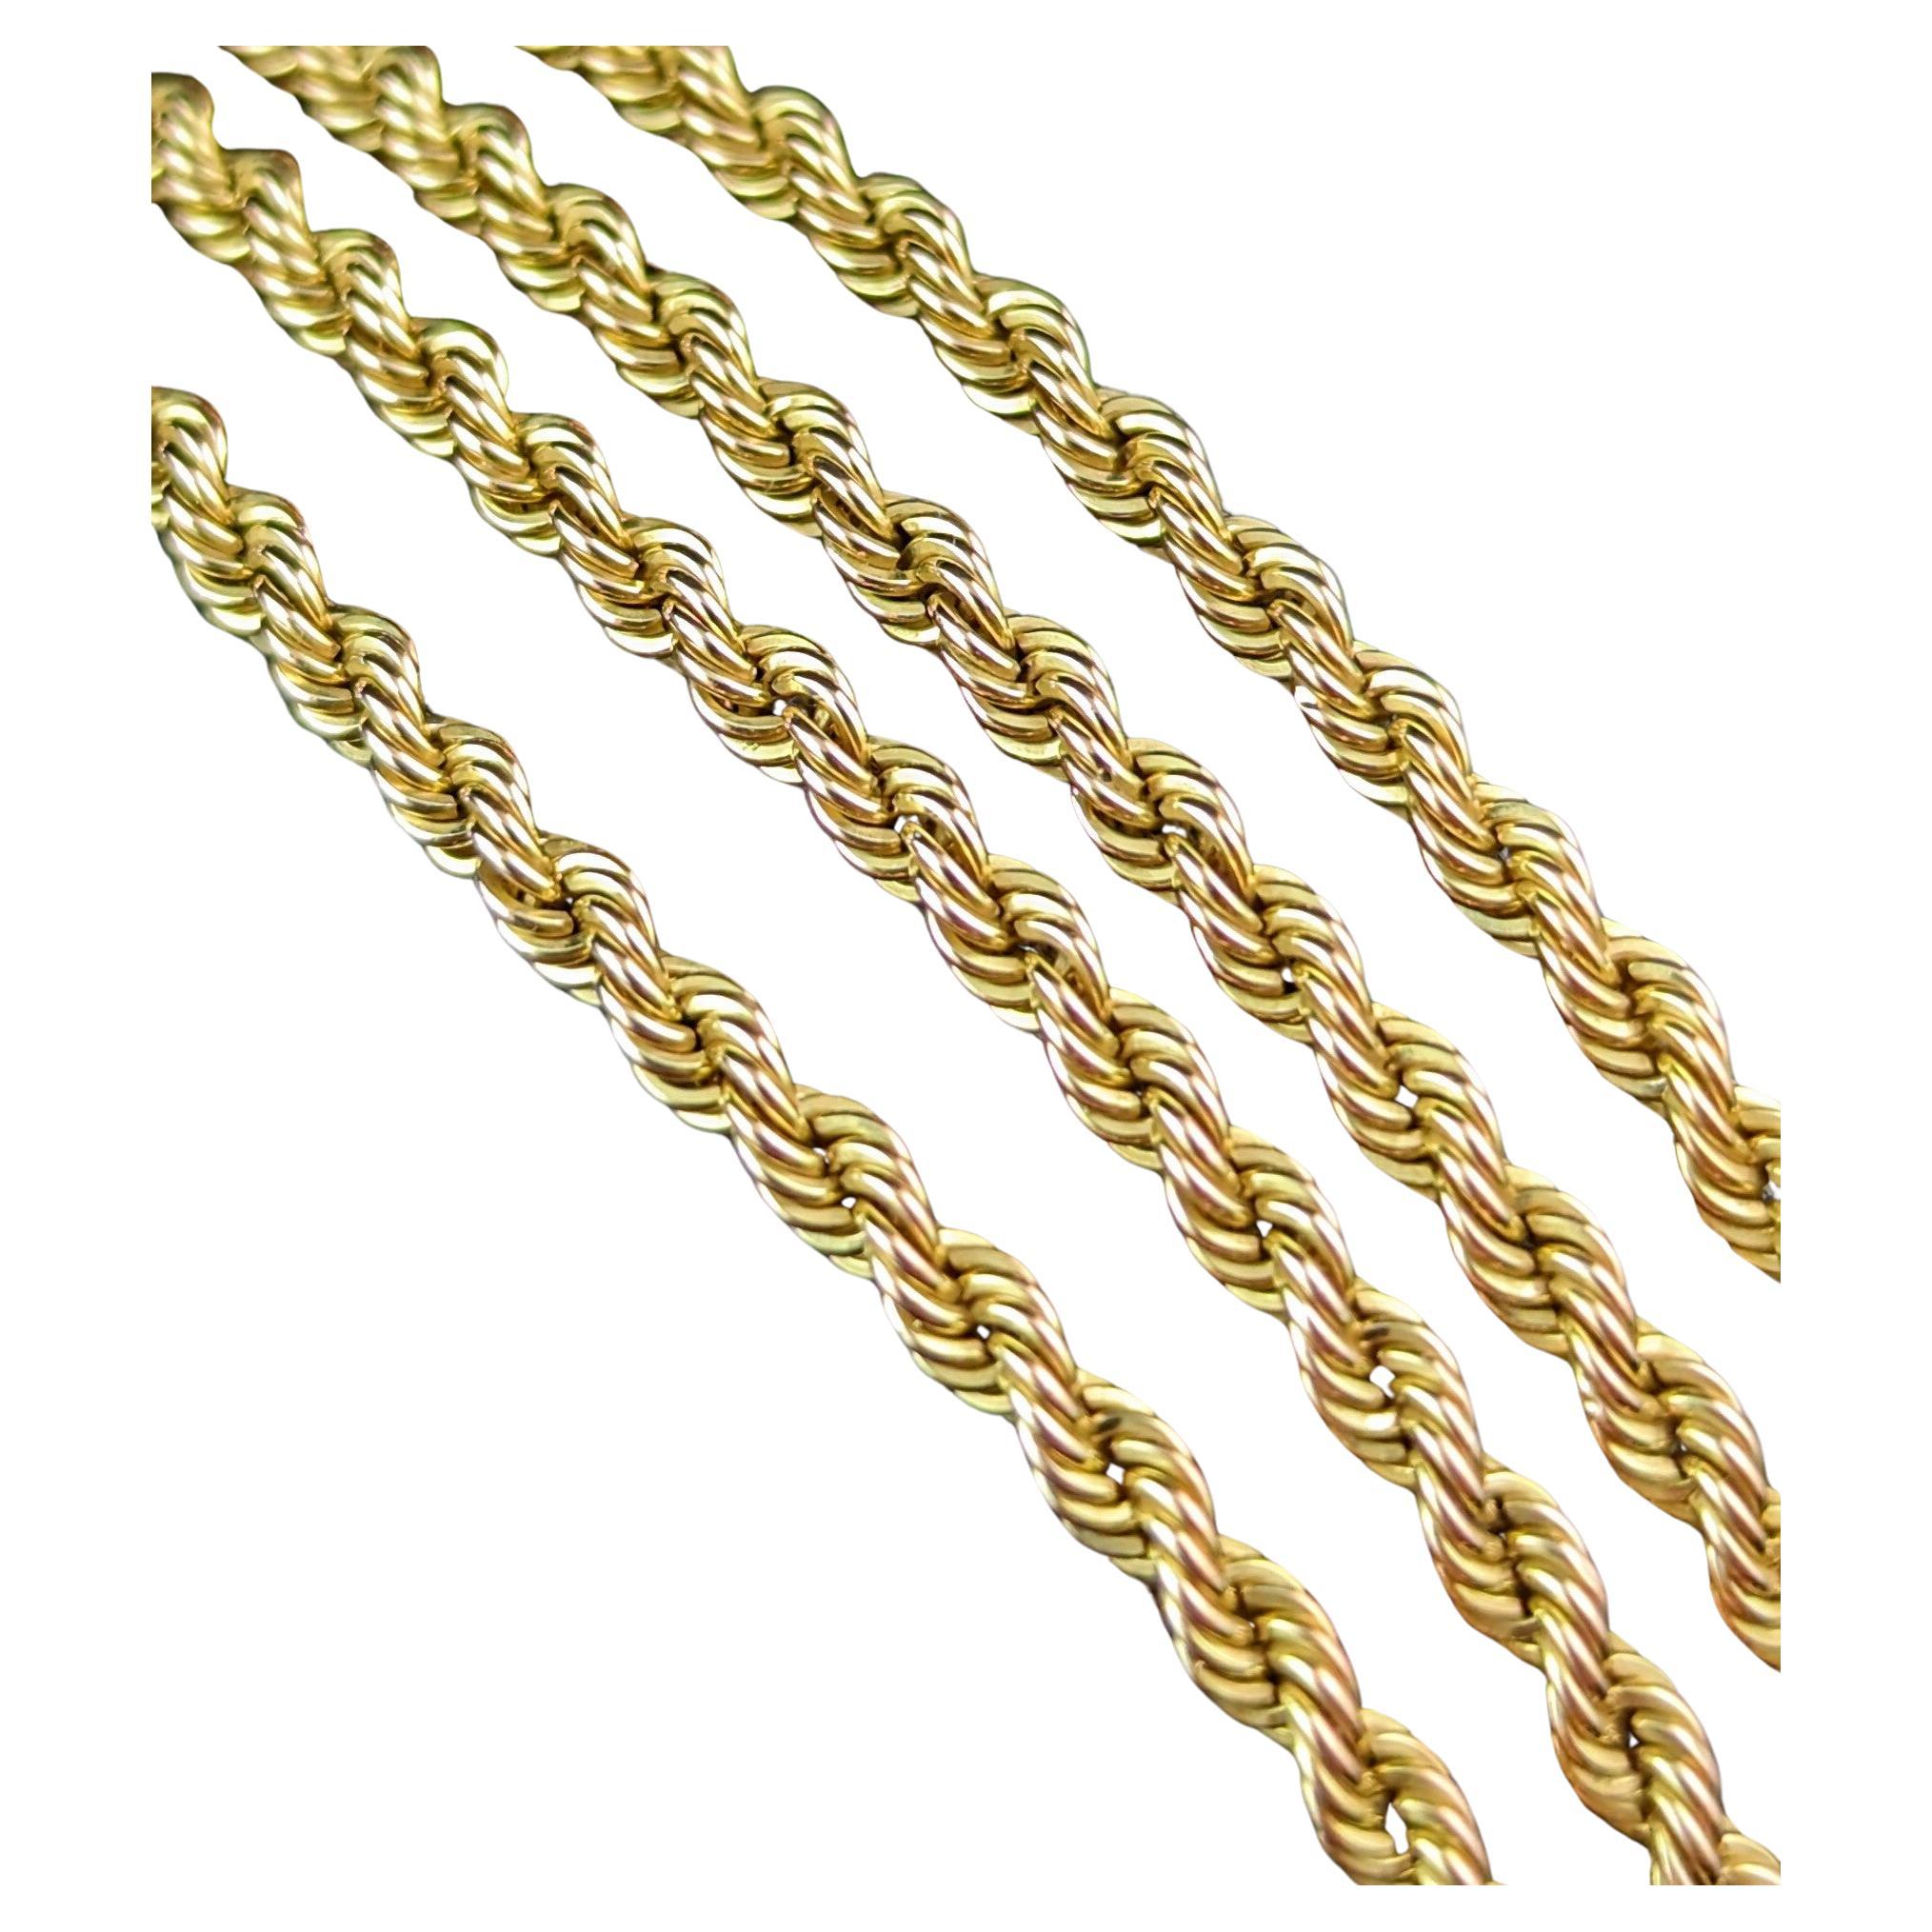 Vintage 9k yellow gold rope twist link chain necklace